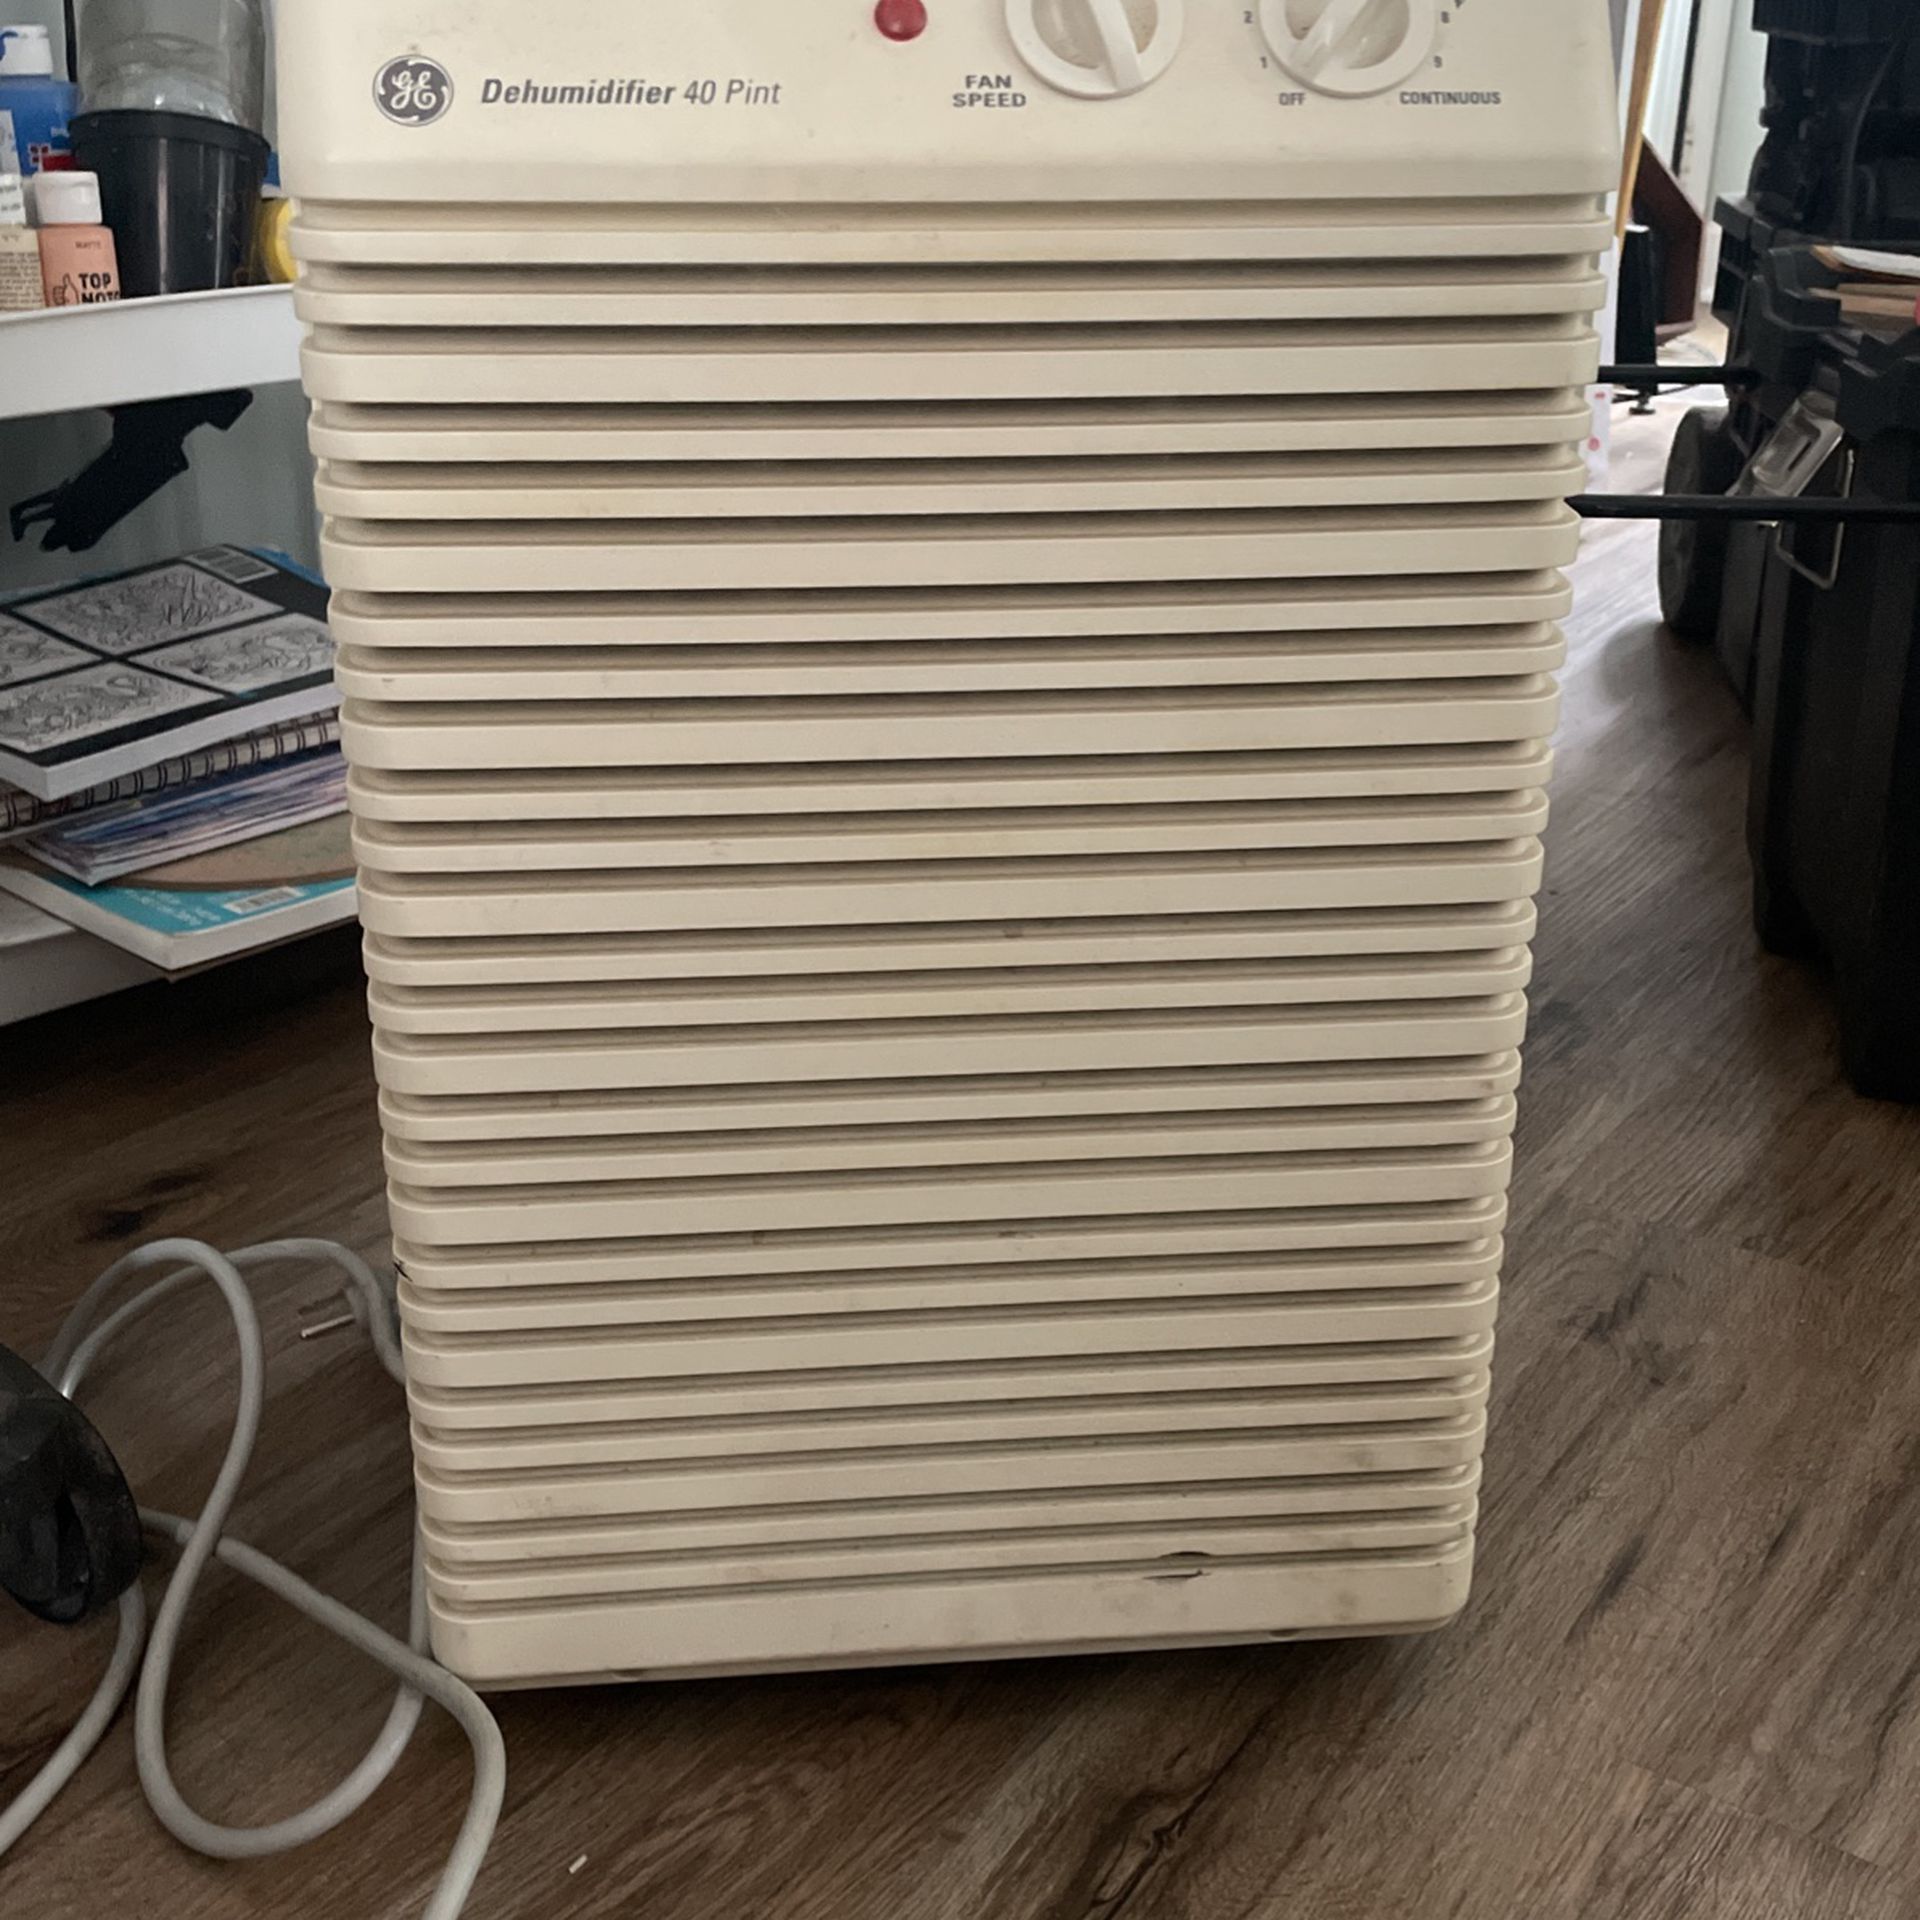 GE Dehumidifier TRUST ME IT WORKS WELL  It’s Currently Working Right Now! If you look at thef last pictures, you’ll see how good this works